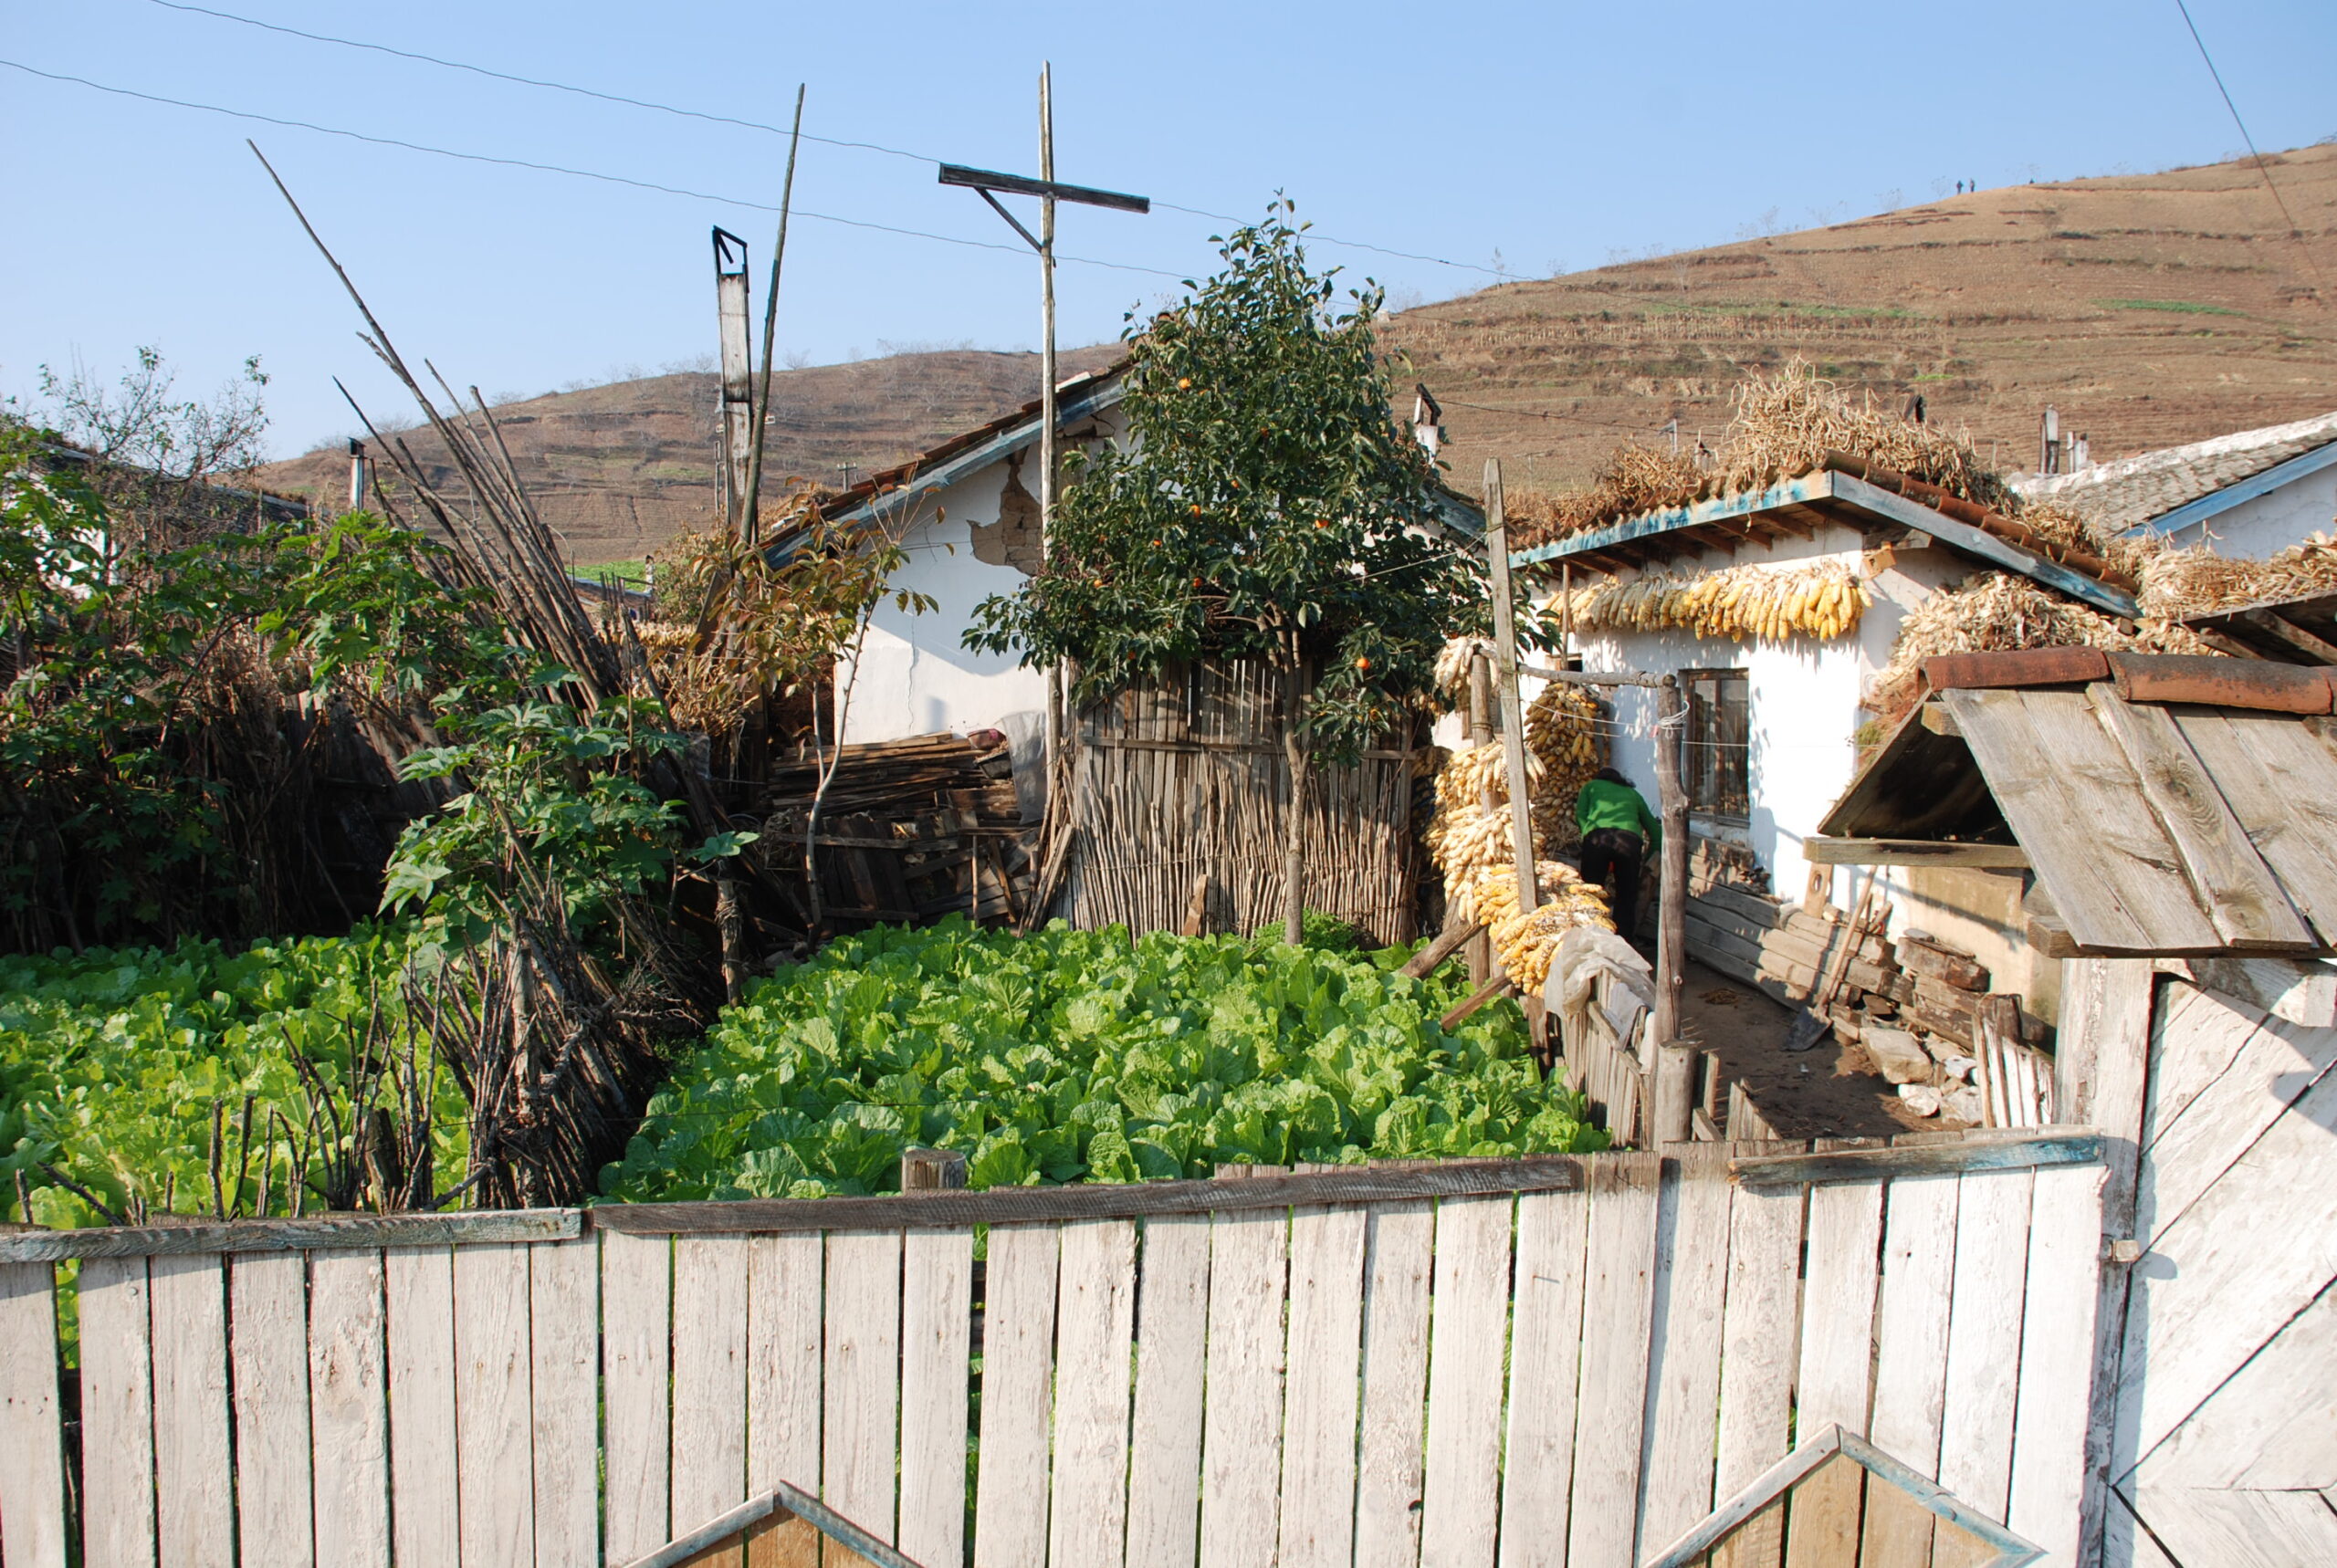 In all the villages visited, the small gardens around houses are all being used to grow food, mostly cabbage for the traditional Korean dish "kimchi" or pickled cabbage.